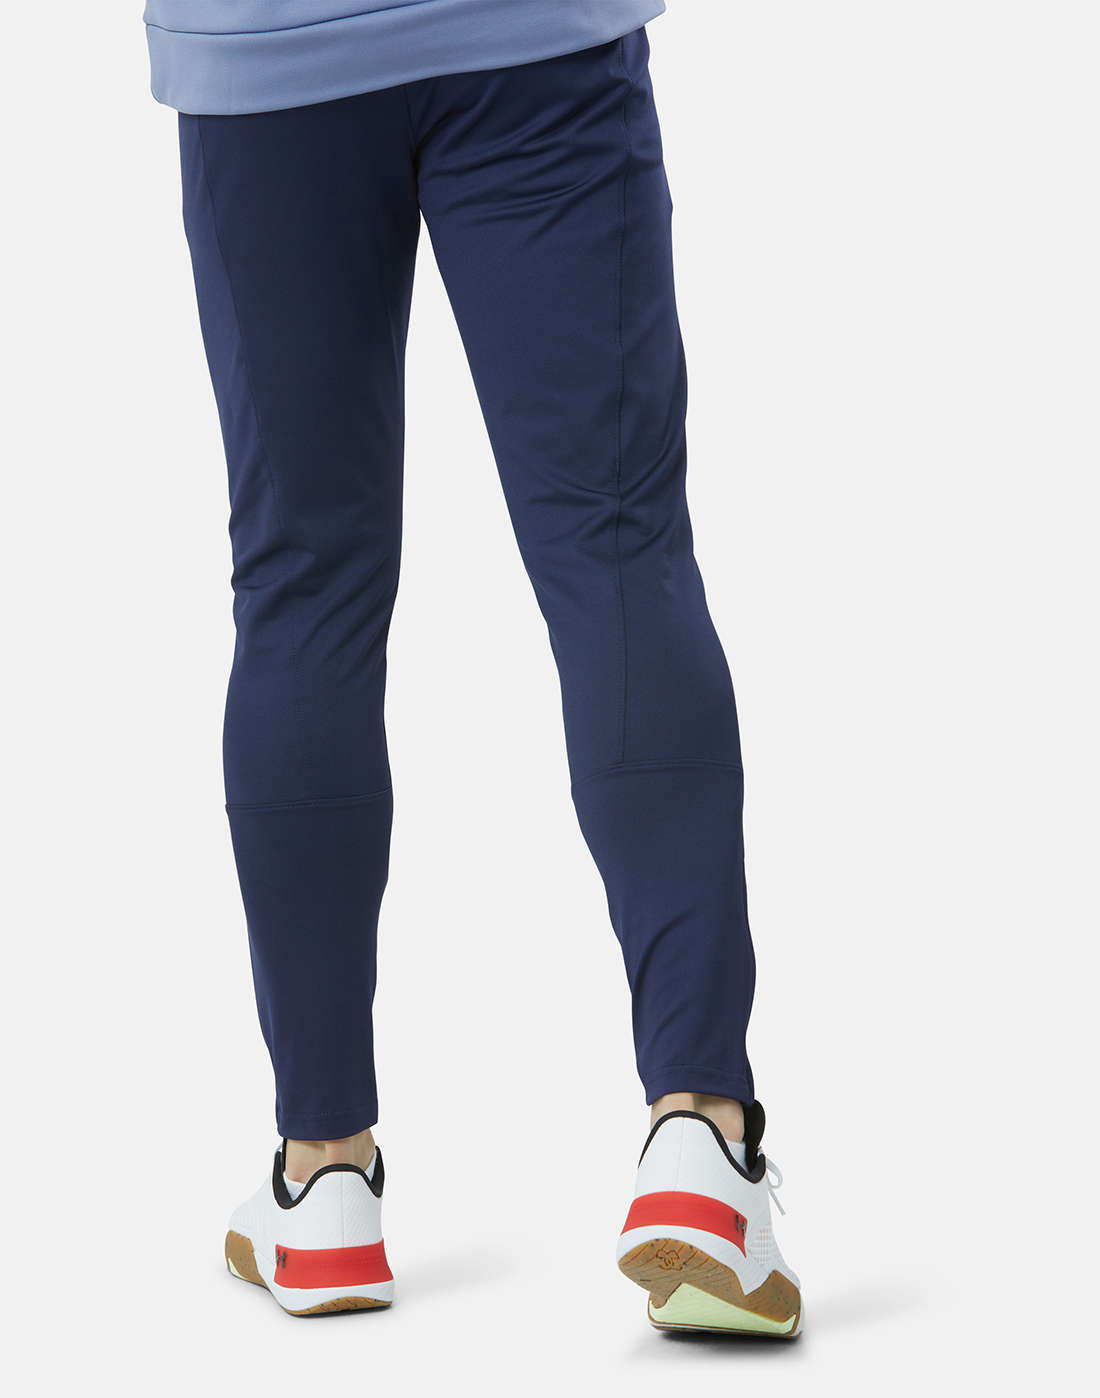 Under Armour Mens Challenger Training Pants - Navy | Life Style Sports UK